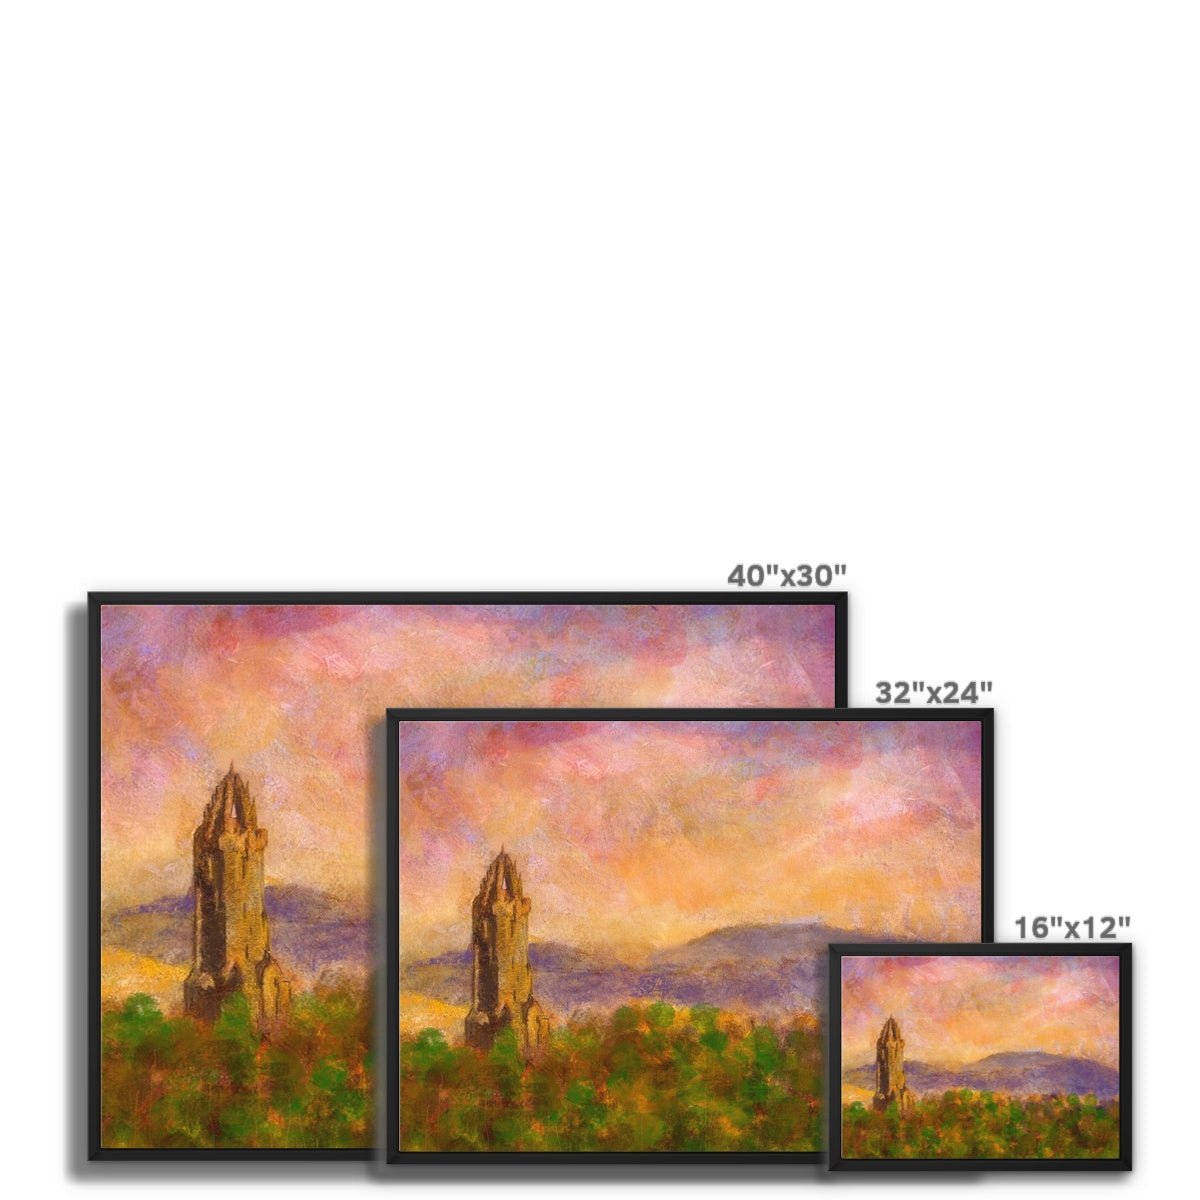 Wallace Monument Dusk Painting | Framed Canvas From Scotland-Floating Framed Canvas Prints-Historic & Iconic Scotland Art Gallery-Paintings, Prints, Homeware, Art Gifts From Scotland By Scottish Artist Kevin Hunter